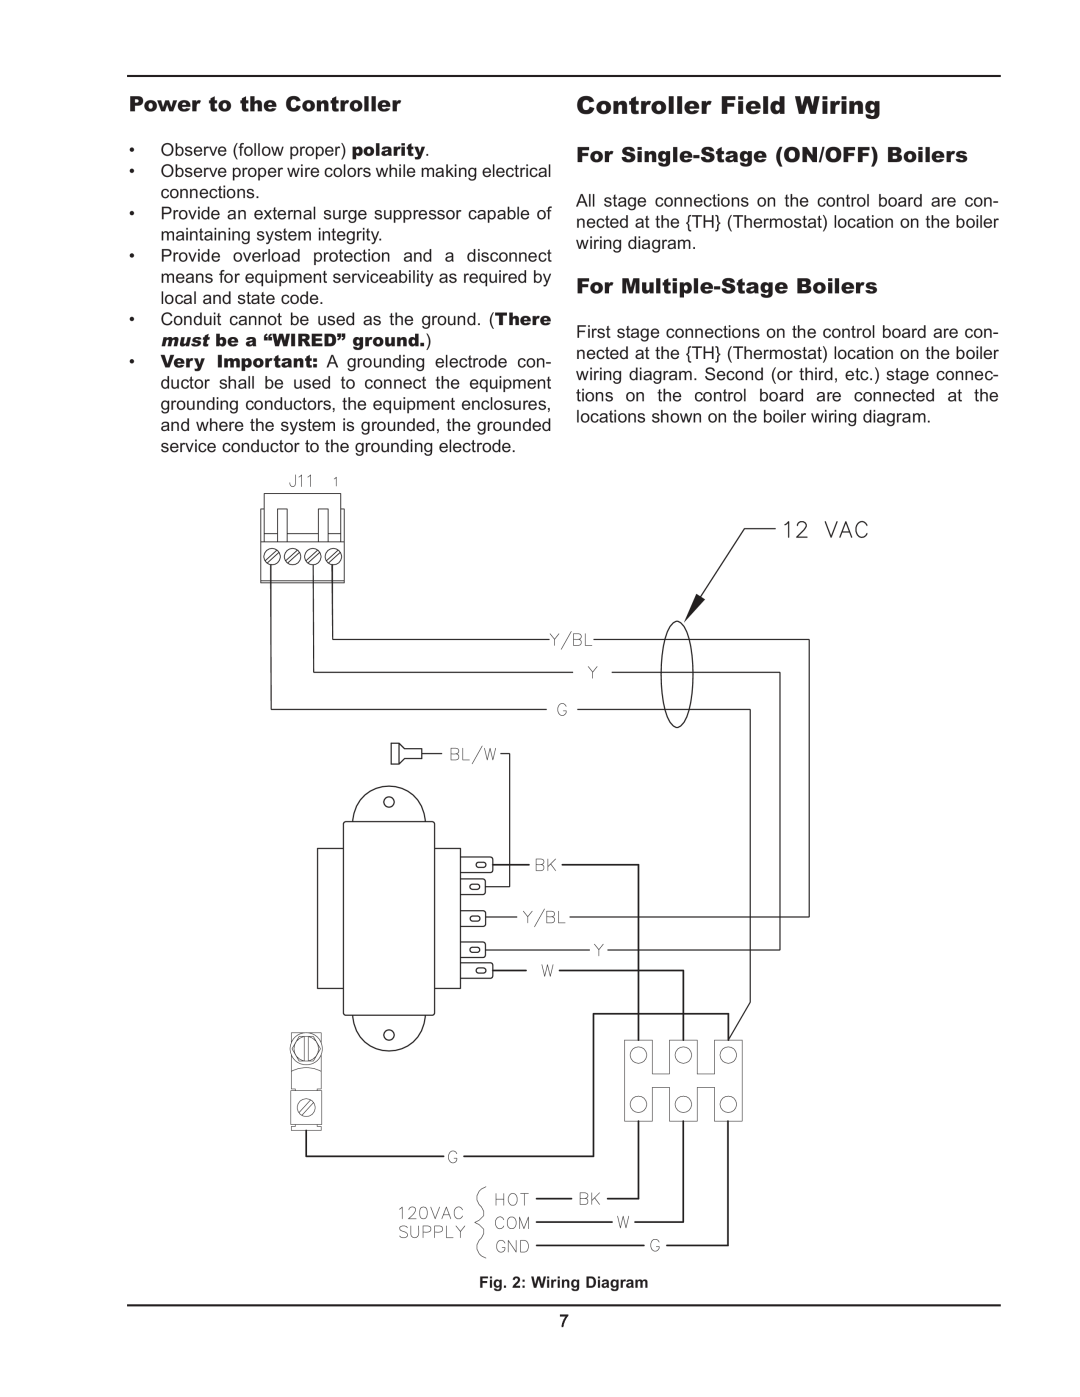 Raypak Y-200 Controller Field Wiring, Power to the Controller, For Single-StageON/OFF Boilers, For Multiple-StageBoilers 